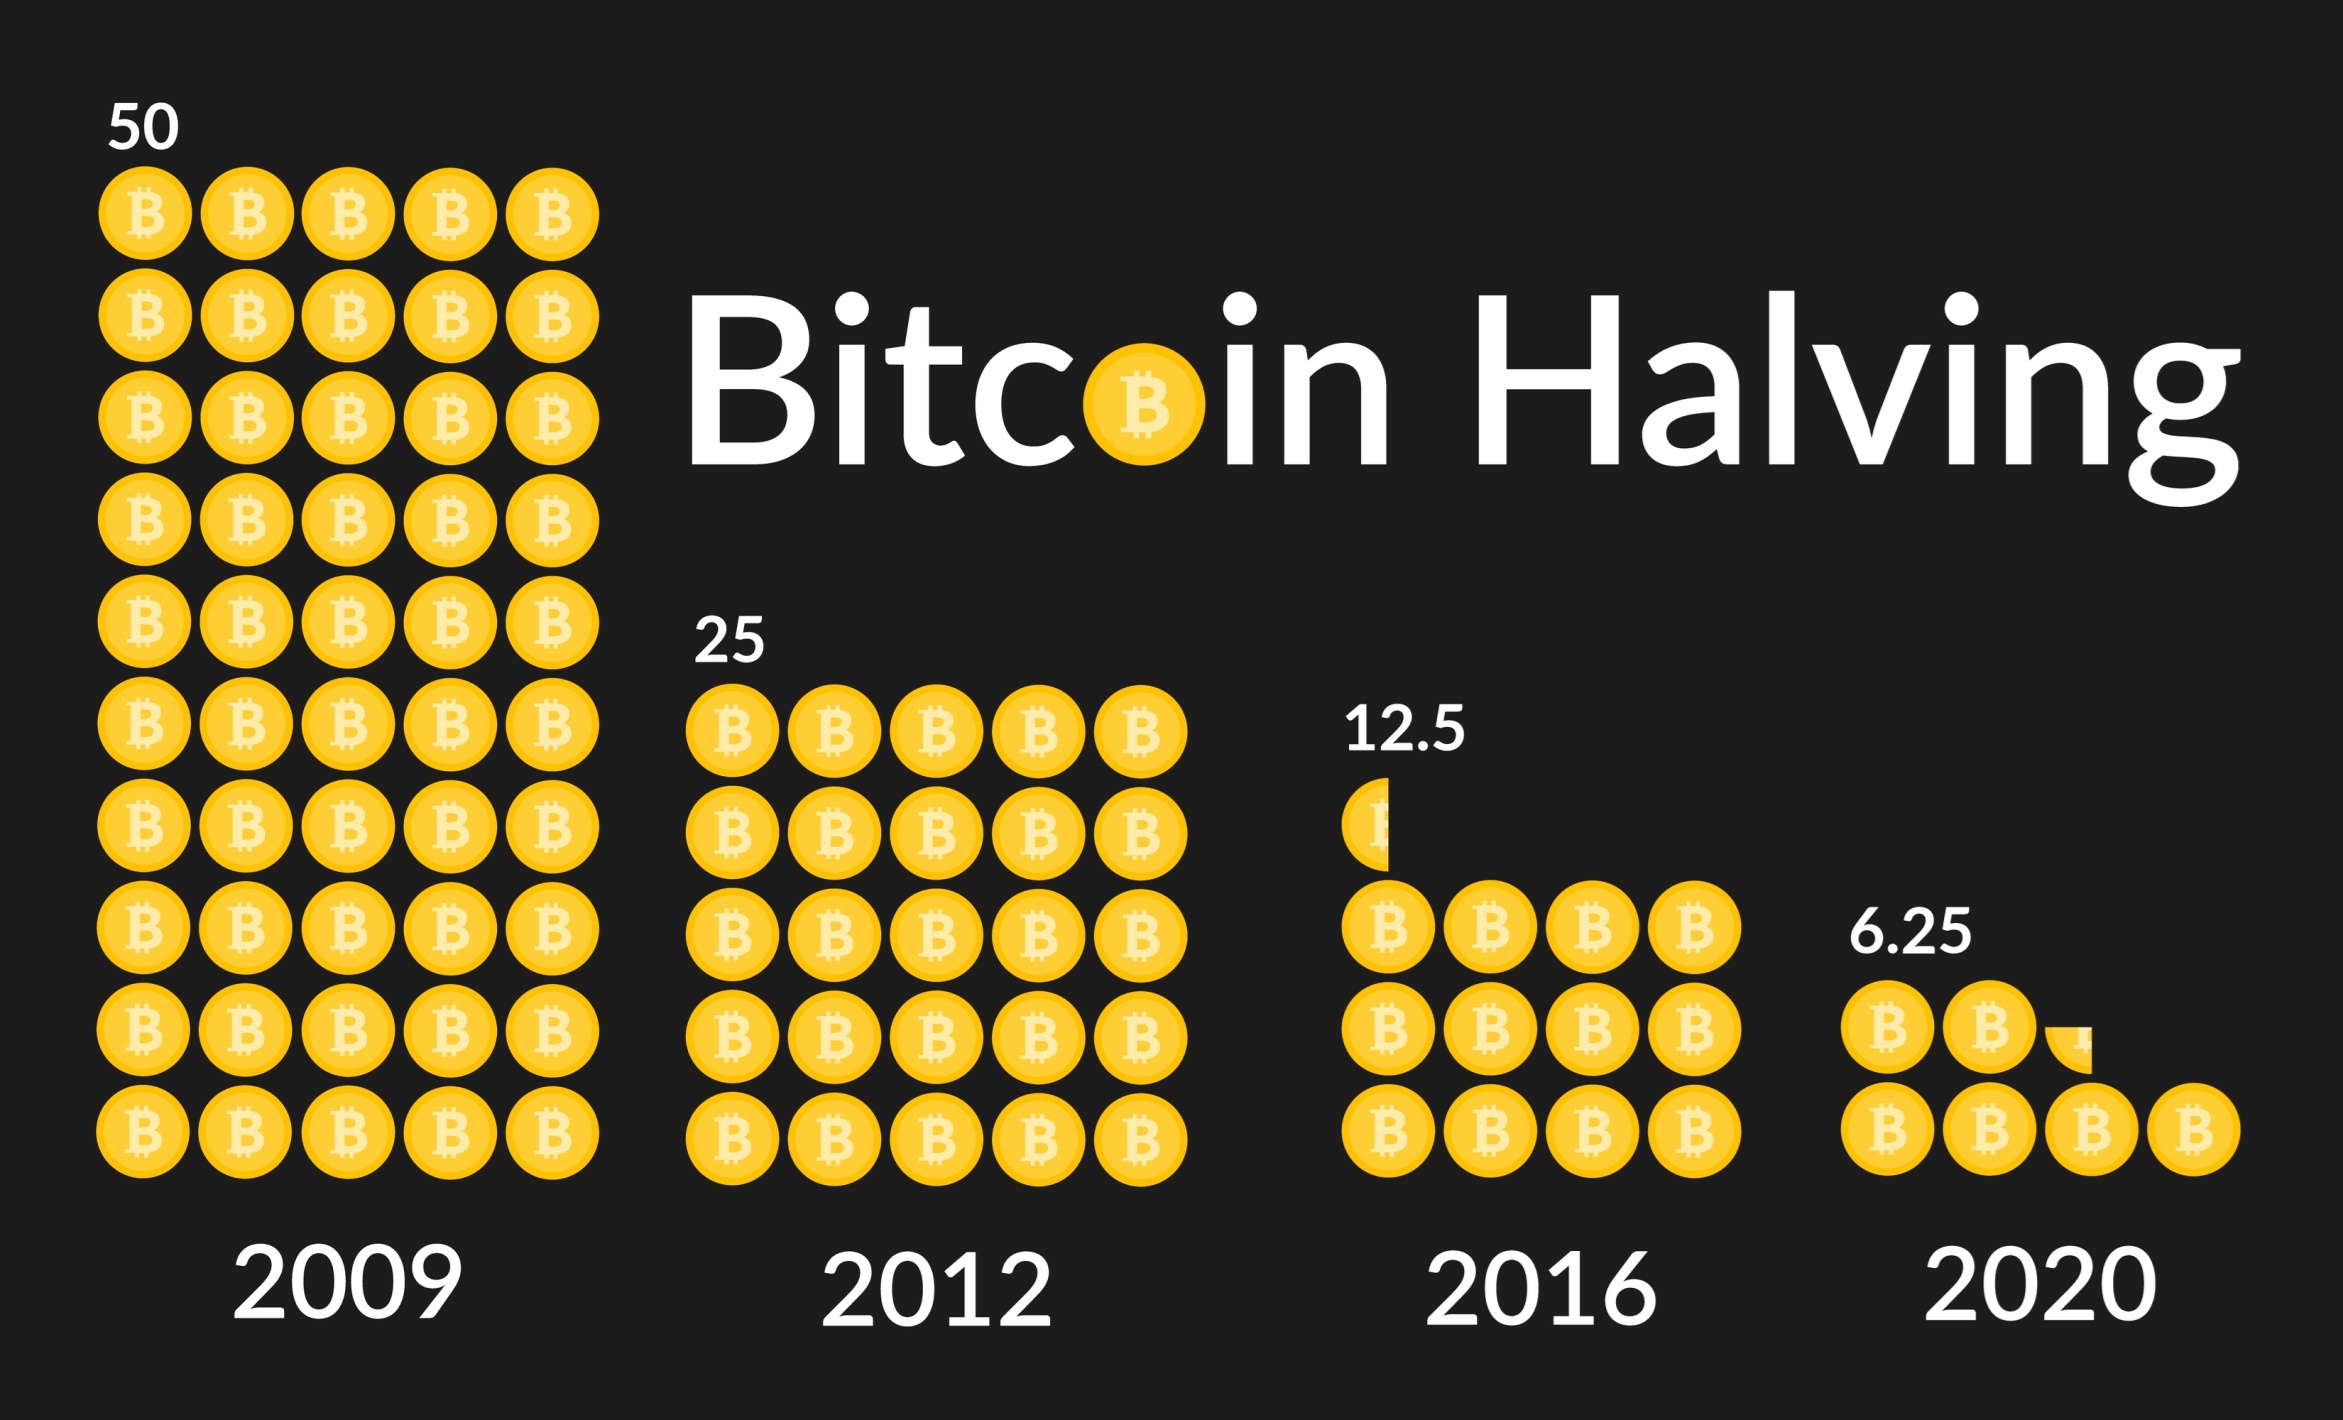 how many total bitcoins are there